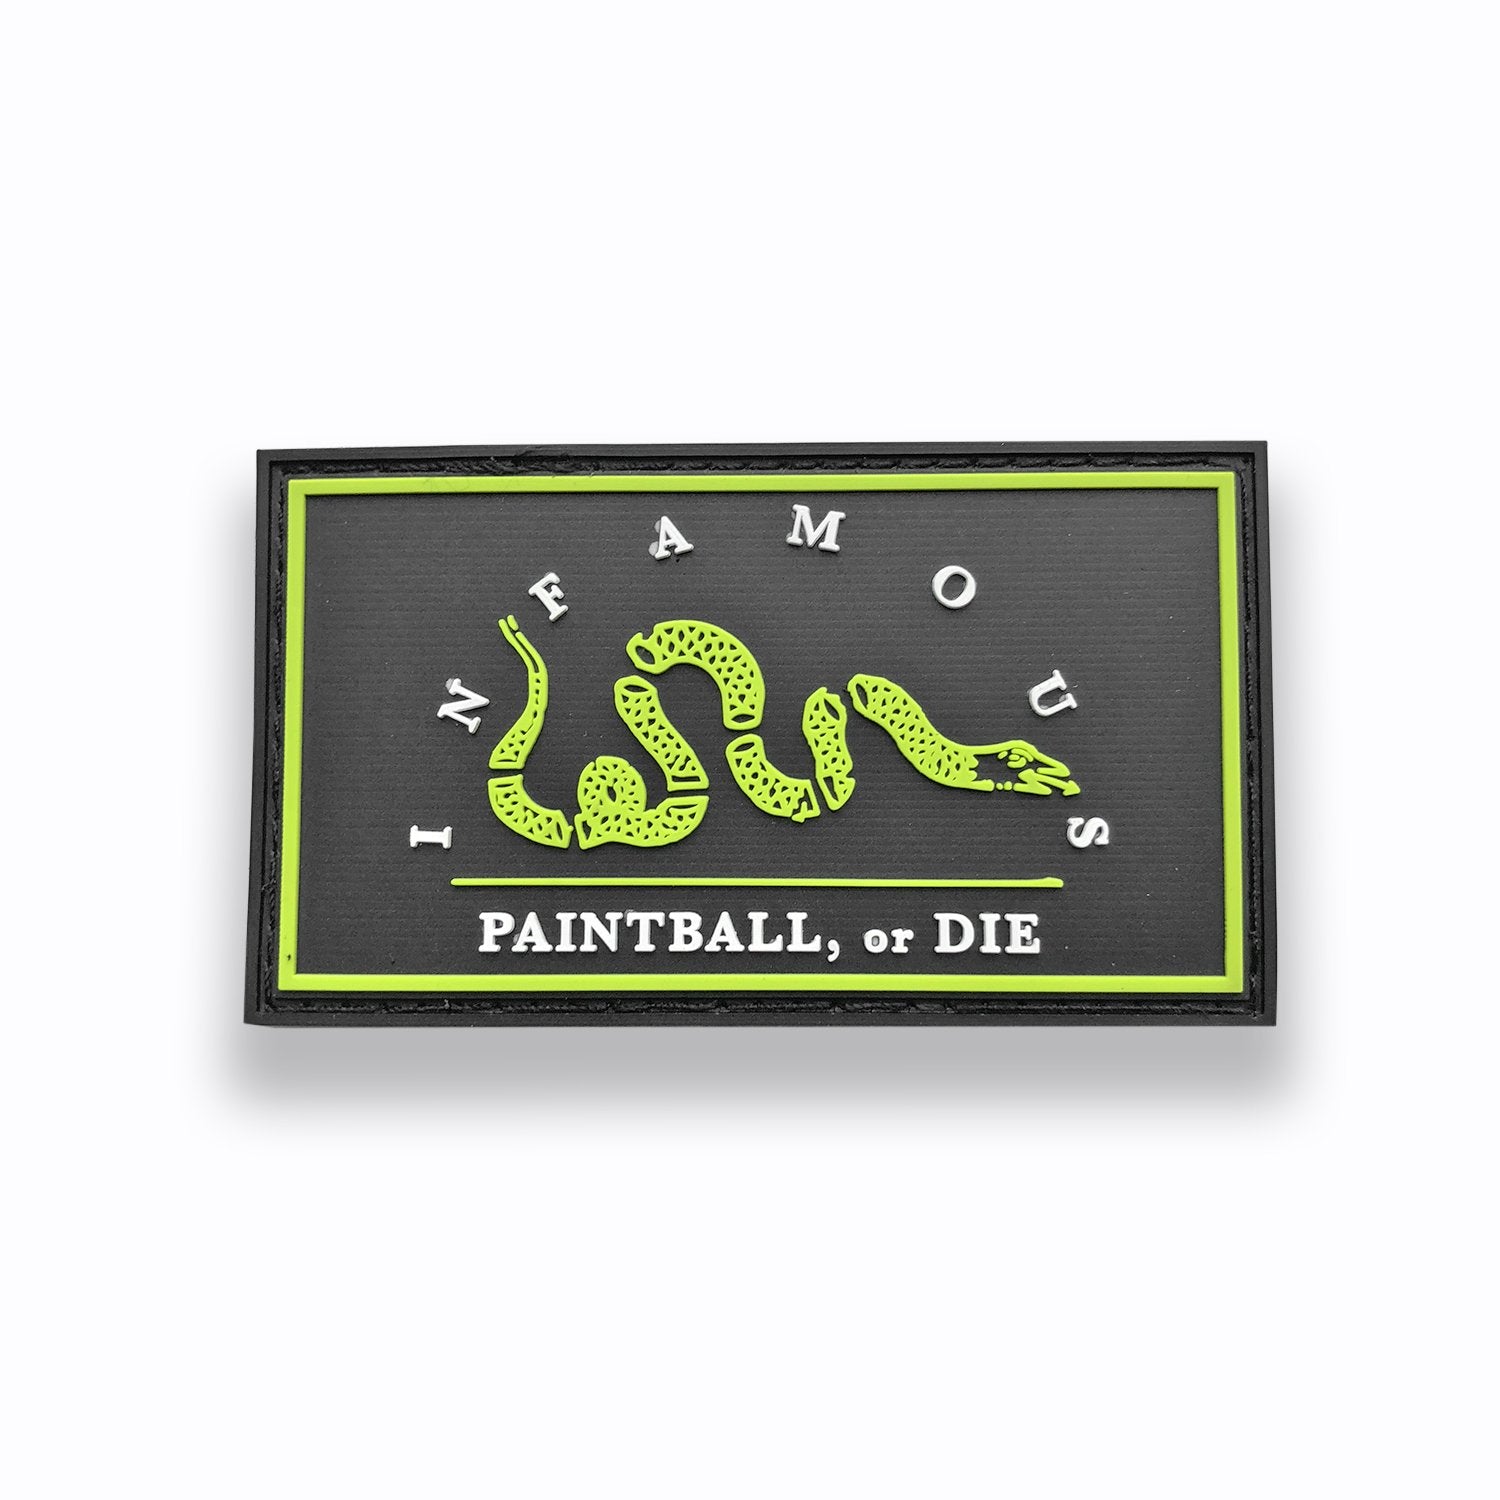 Infamous Paintball Paintball or Die Patch (3.5x2) - Infamous